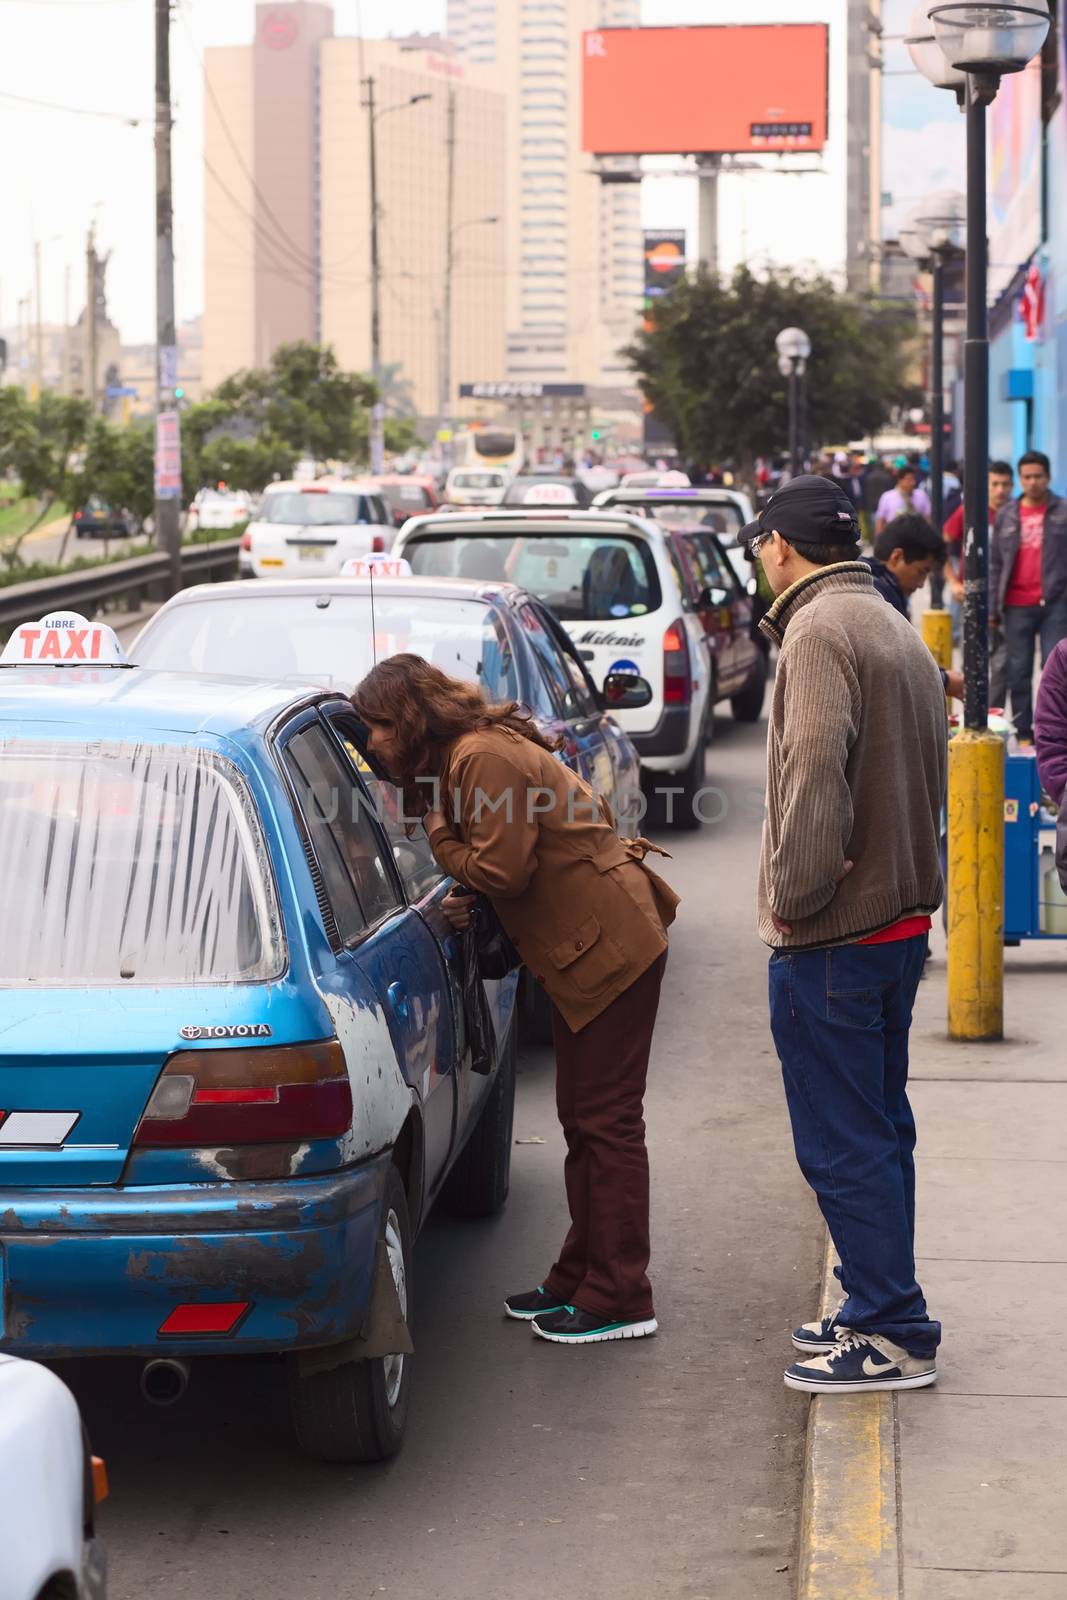 LIMA, PERU - JULY 21, 2013: Unidentified woman asking a taxi for the fare in front of the mall Polvos Azules on Av. Paseo de la Republica in the city center on July 21, 2013 in Lima, Peru. In Lima, taxi fares are agreed upon beforehand, fares are not standardized.